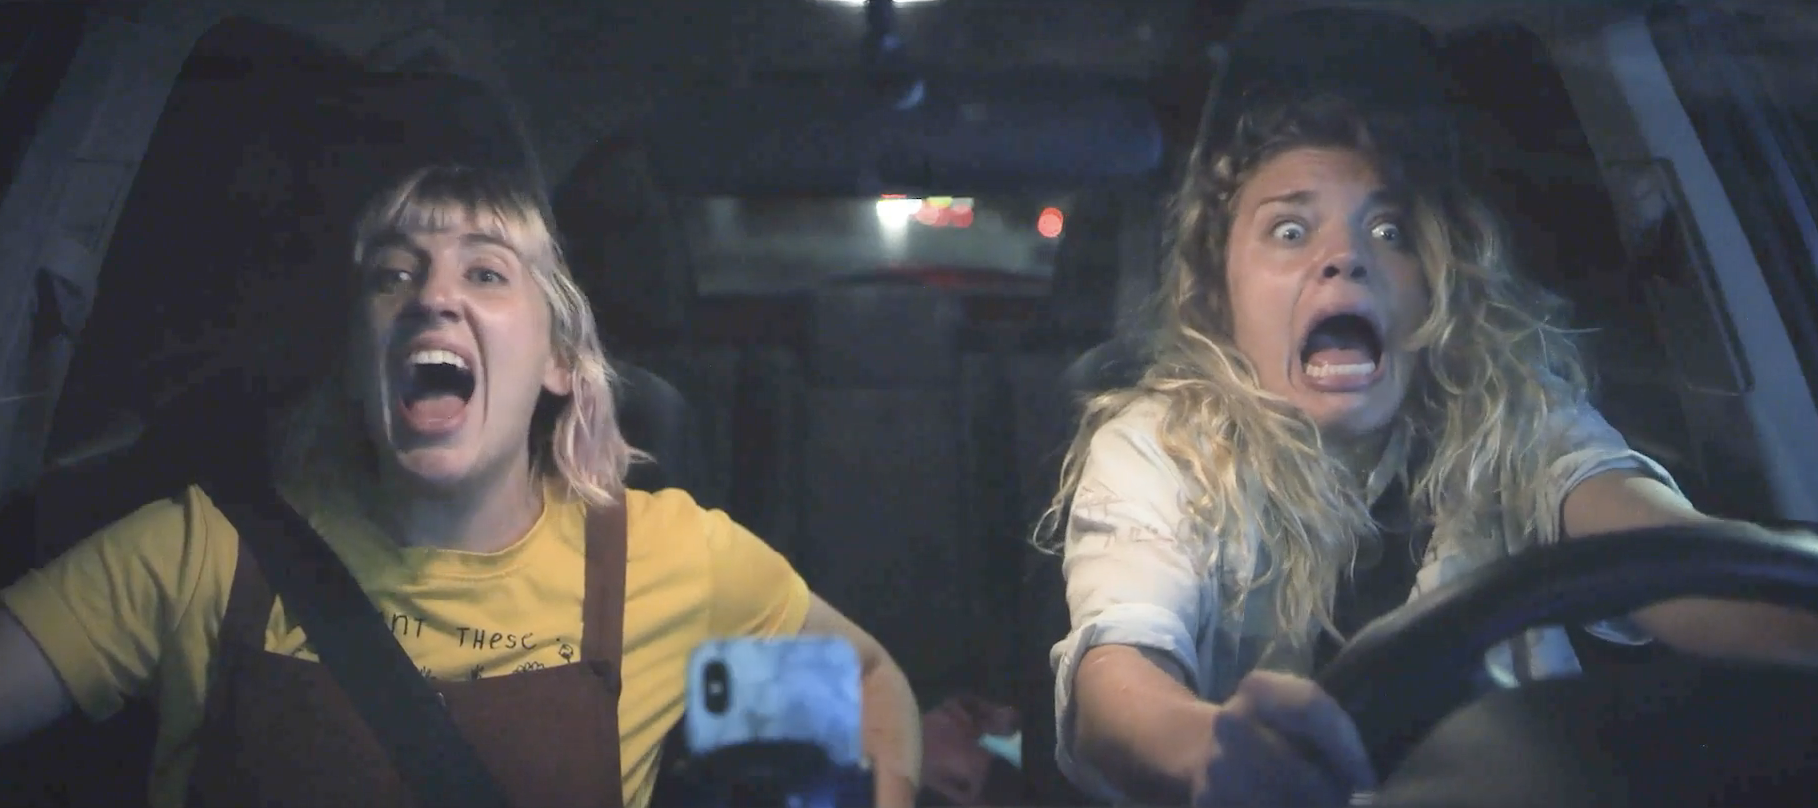 Two women in the car, screaming